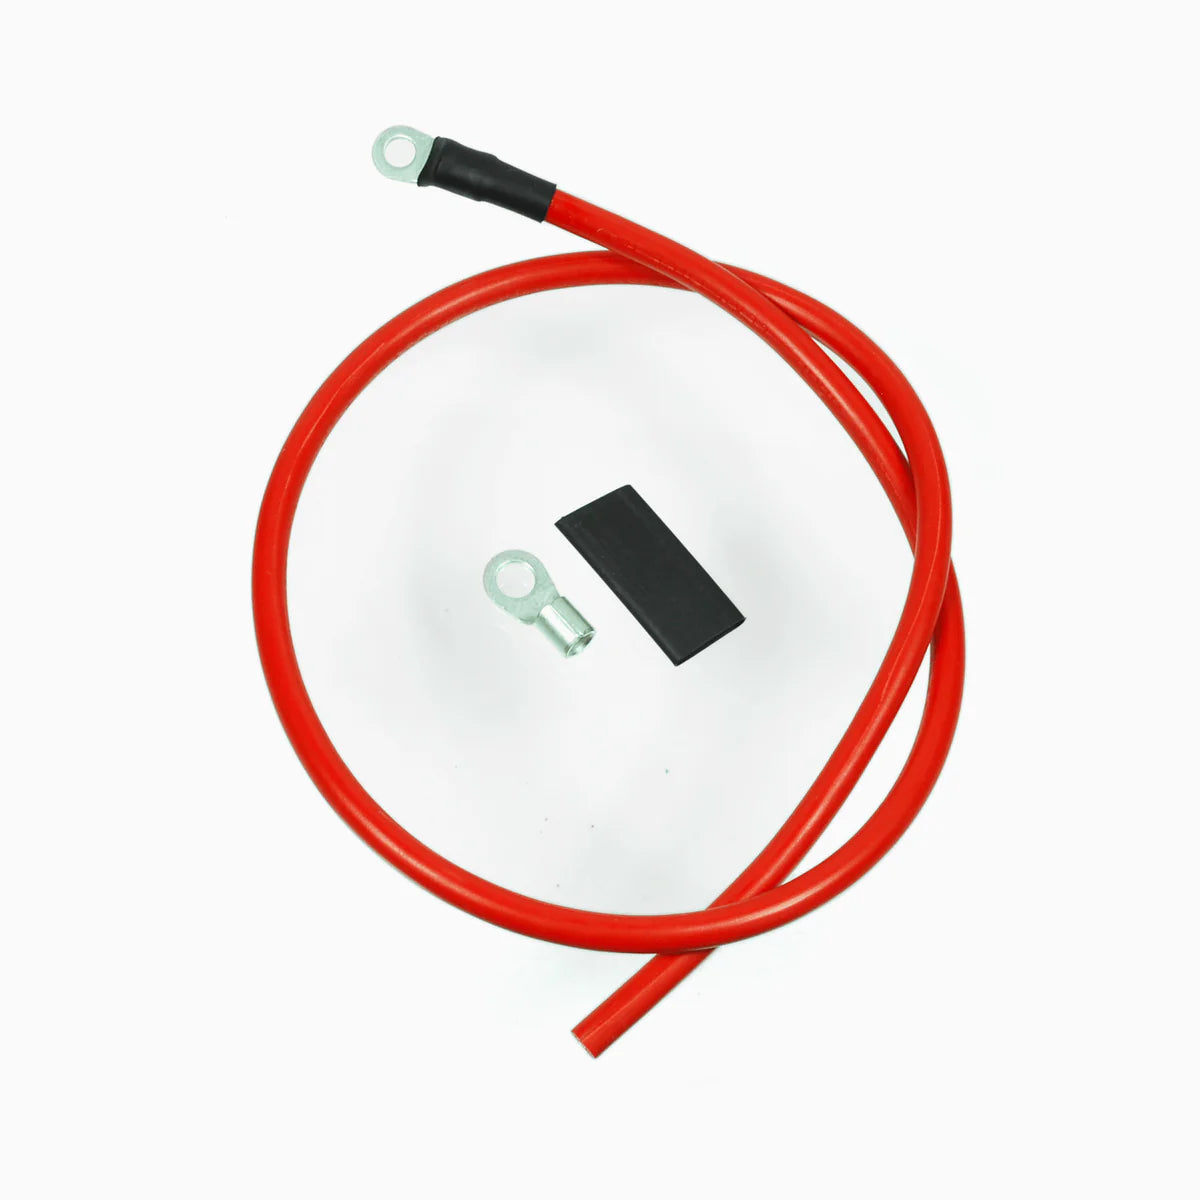 Mo.unit battery cable without fuse